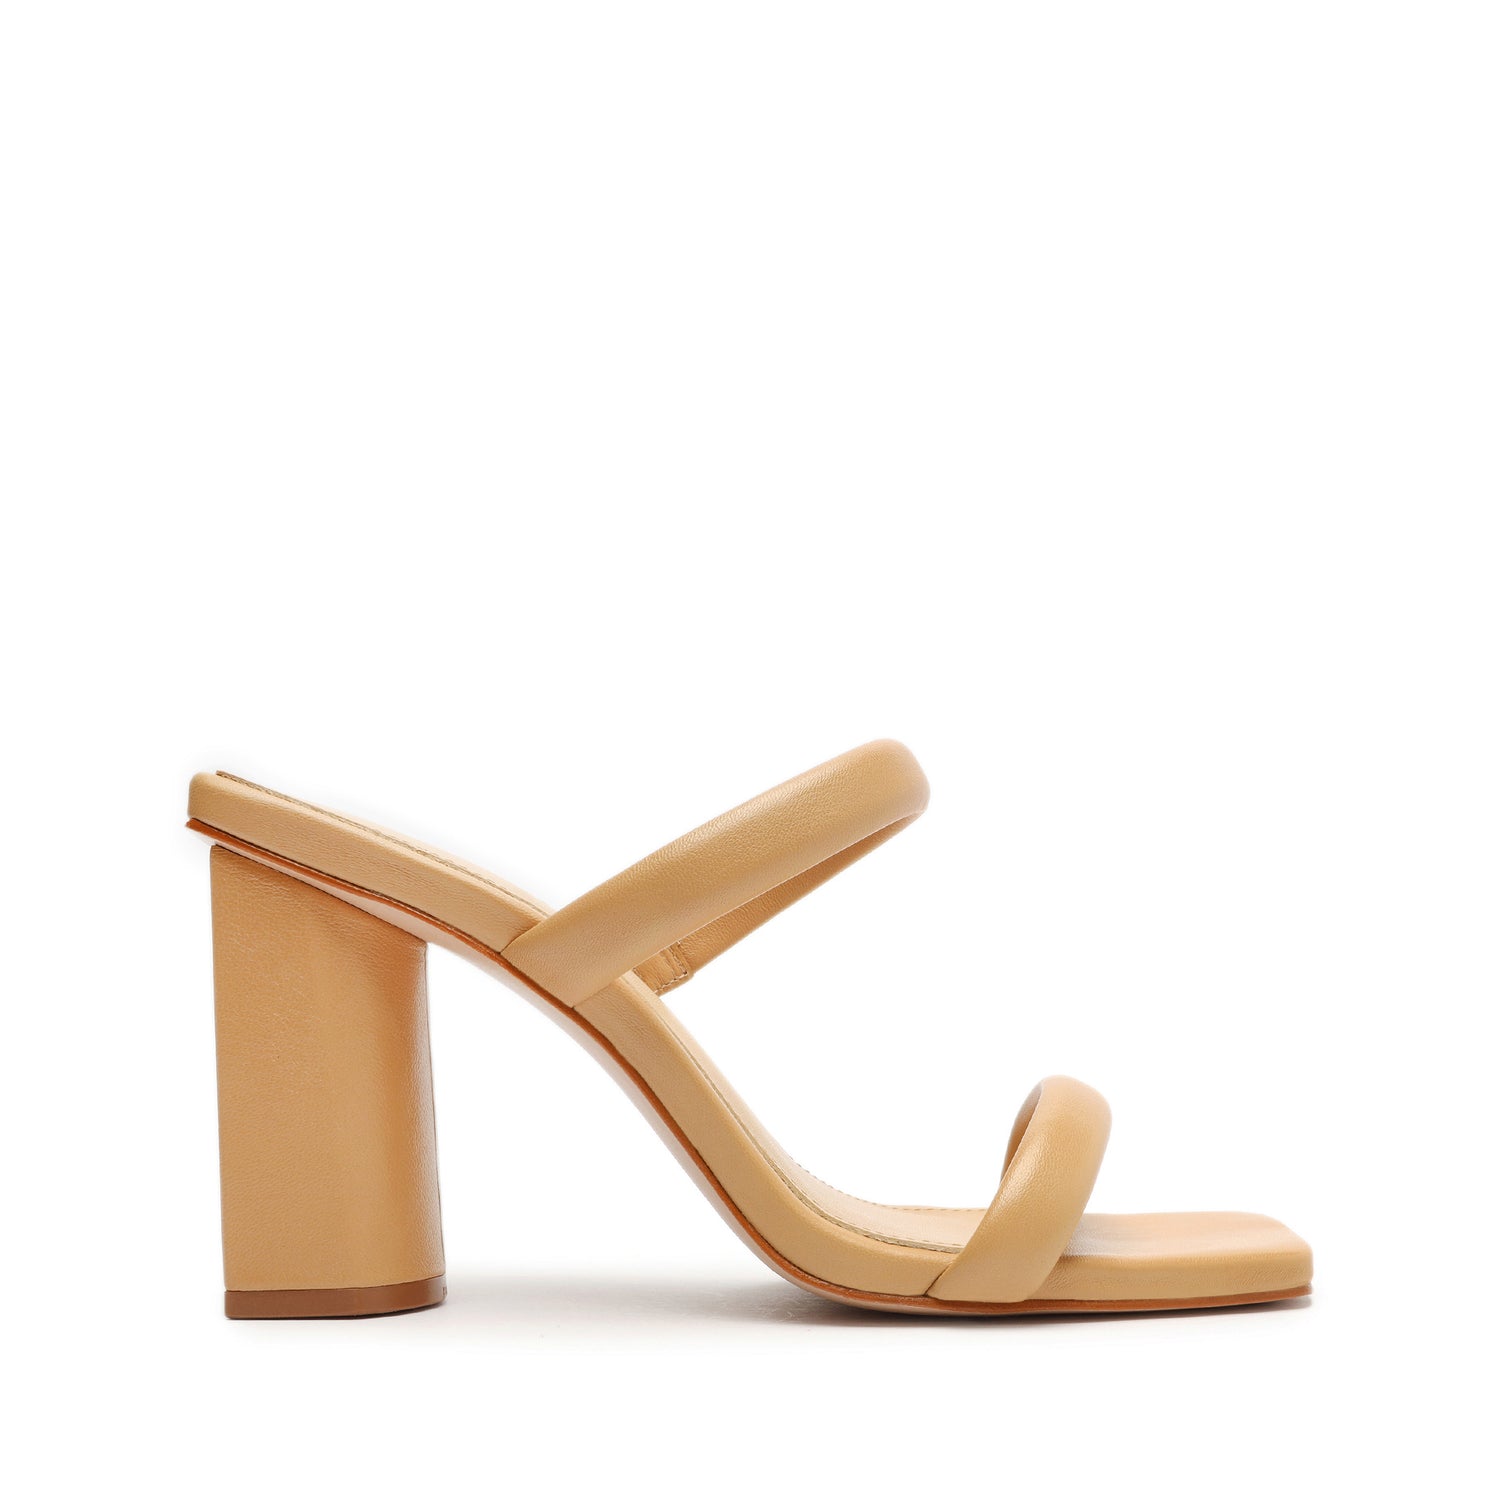 Ully Nappa Leather Sandal Sandals SPRING 24 5 Light Beige Leather - Schutz Shoes